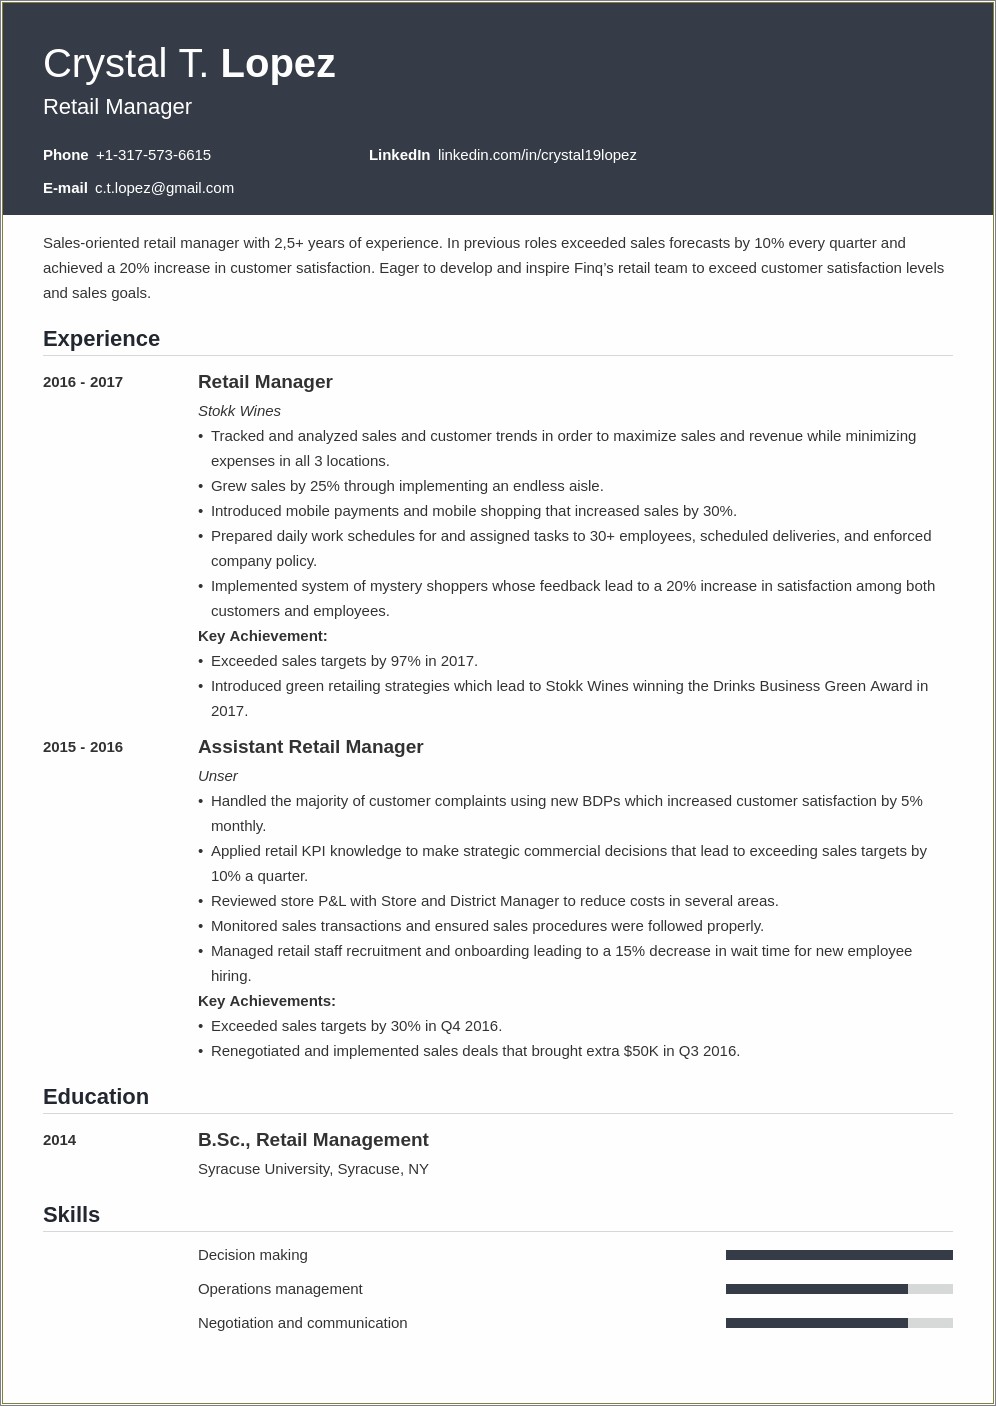 Retail Assistant Store Manager Resume Examples